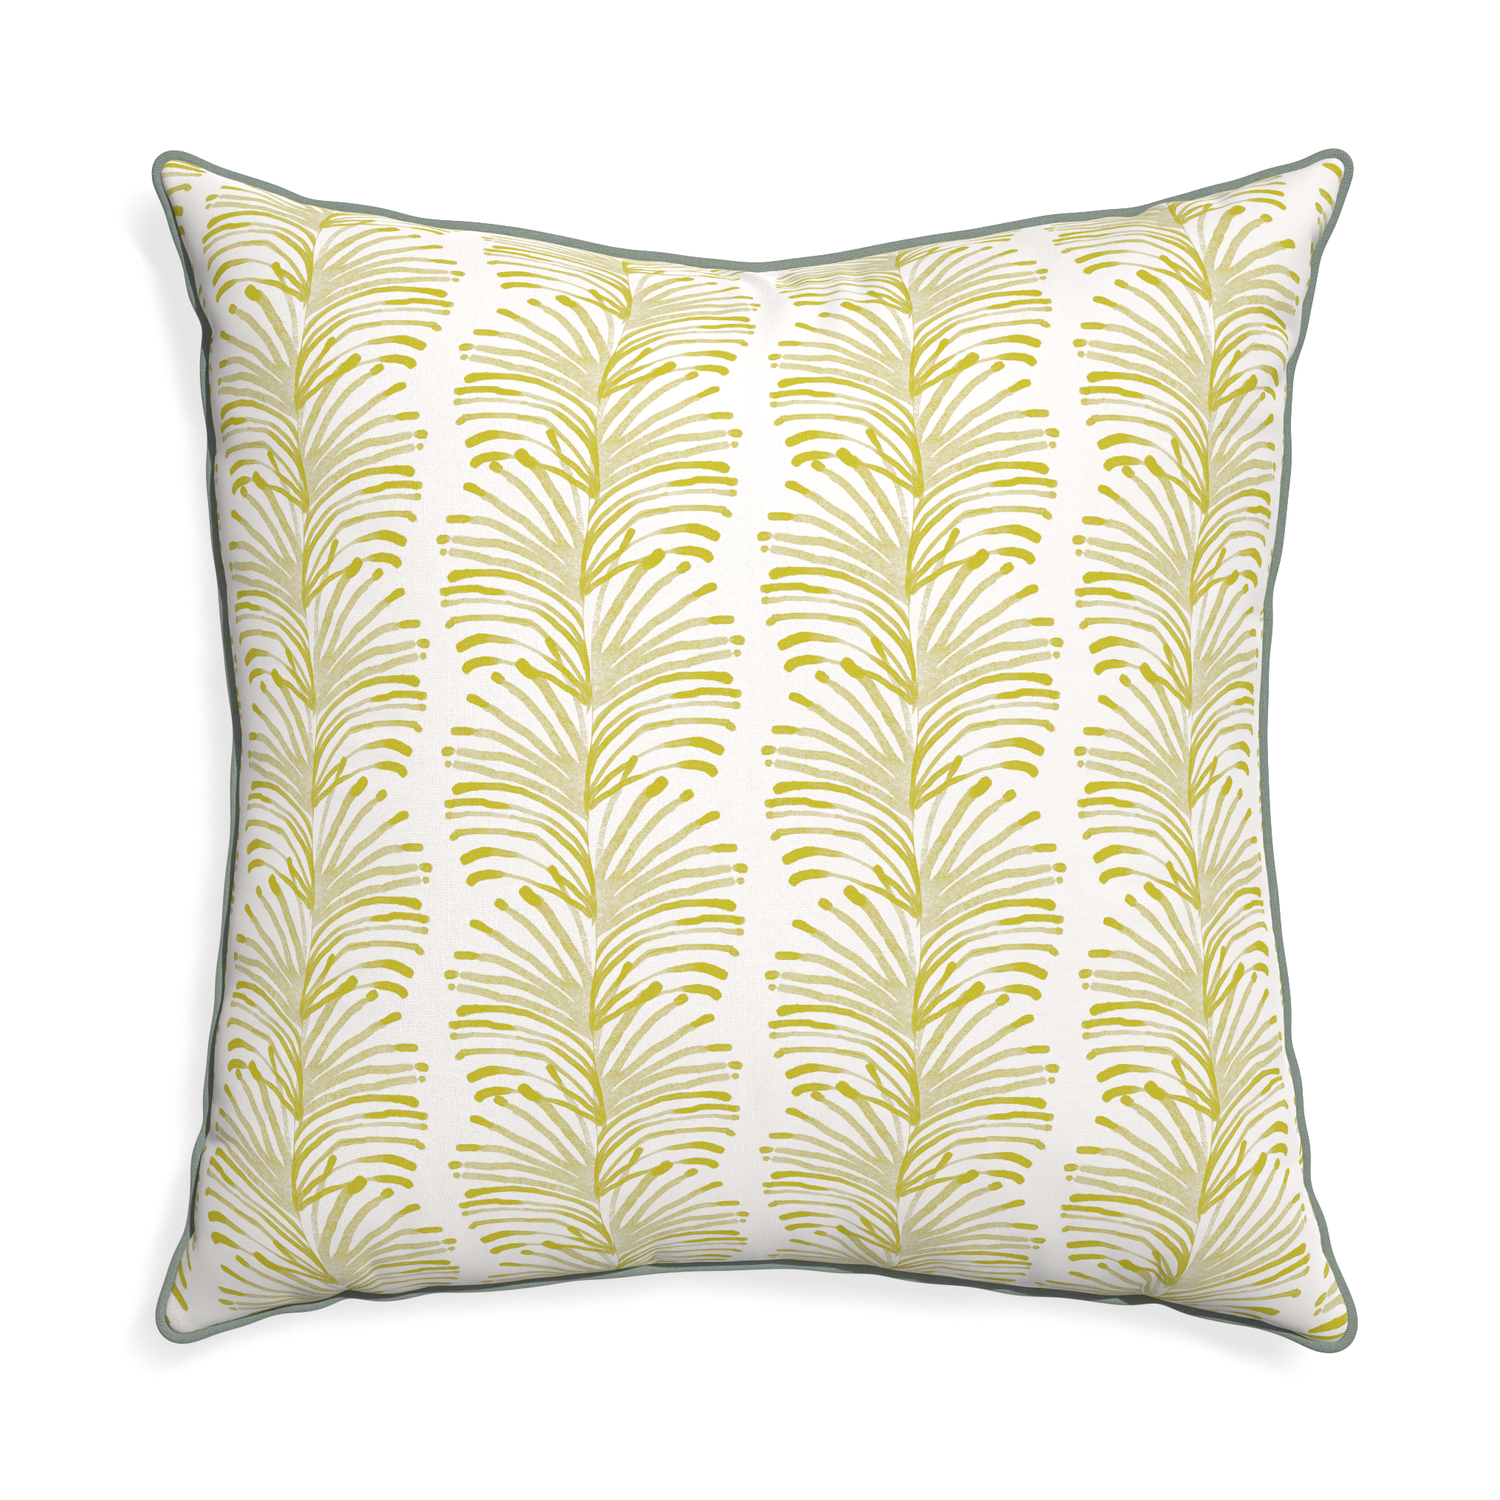 Euro-sham emma chartreuse custom yellow stripe chartreusepillow with sage piping on white background